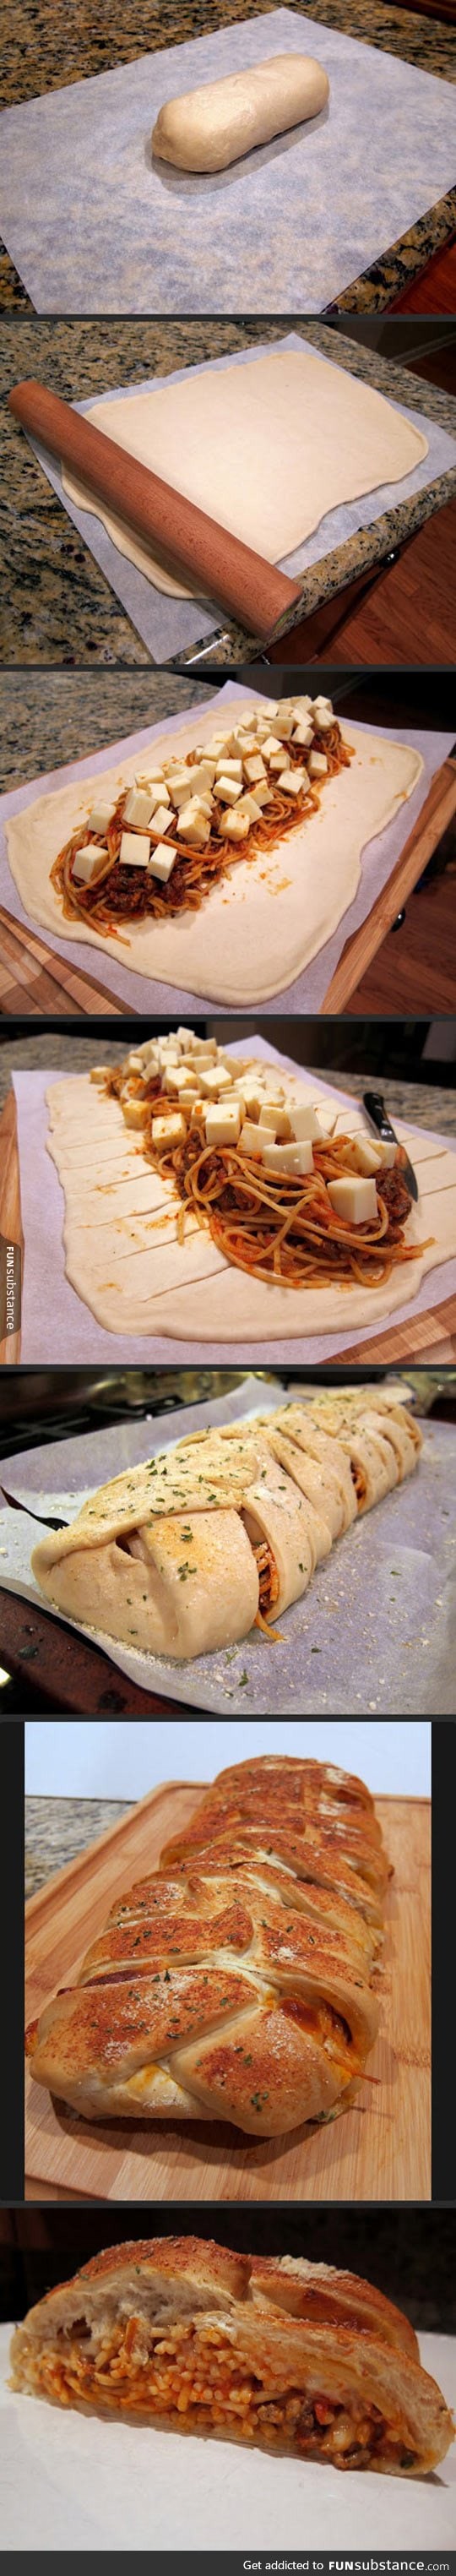 For those who are too lazy to dip bread in spaghetti